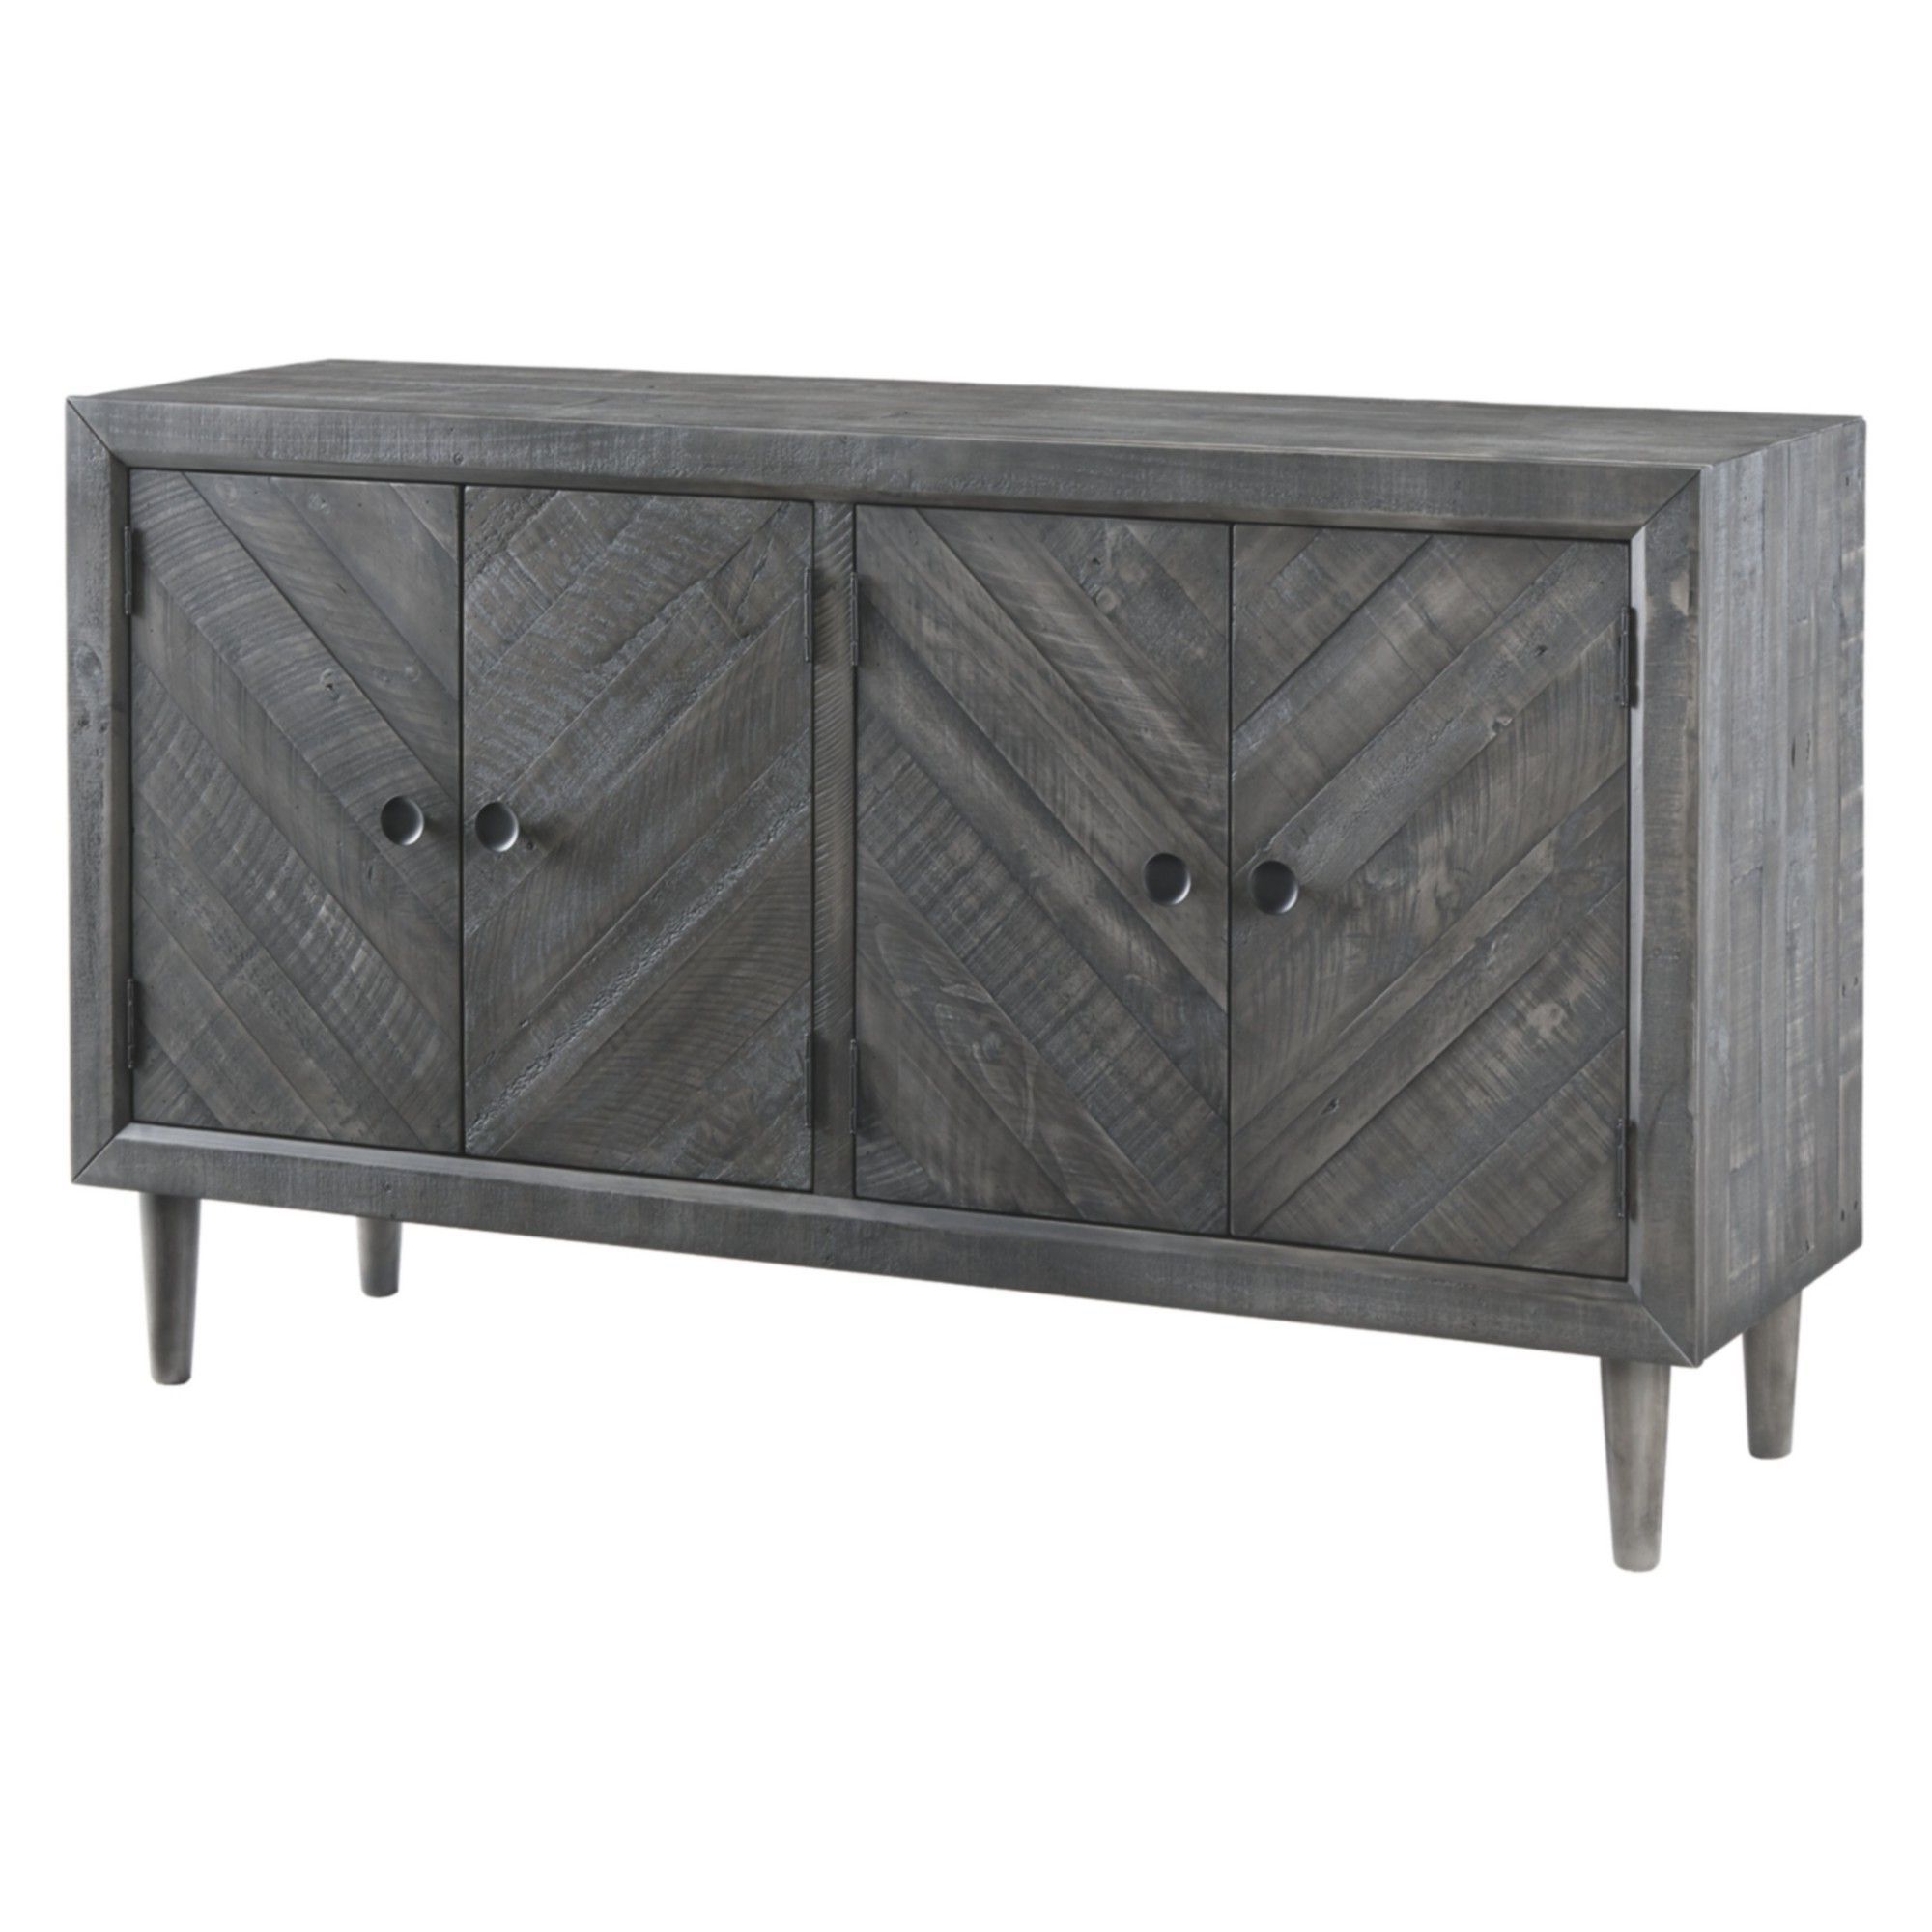 Besteneer Dining Room Server Dark Gray – Signature Design In Famous Rosson Sideboards (View 10 of 20)